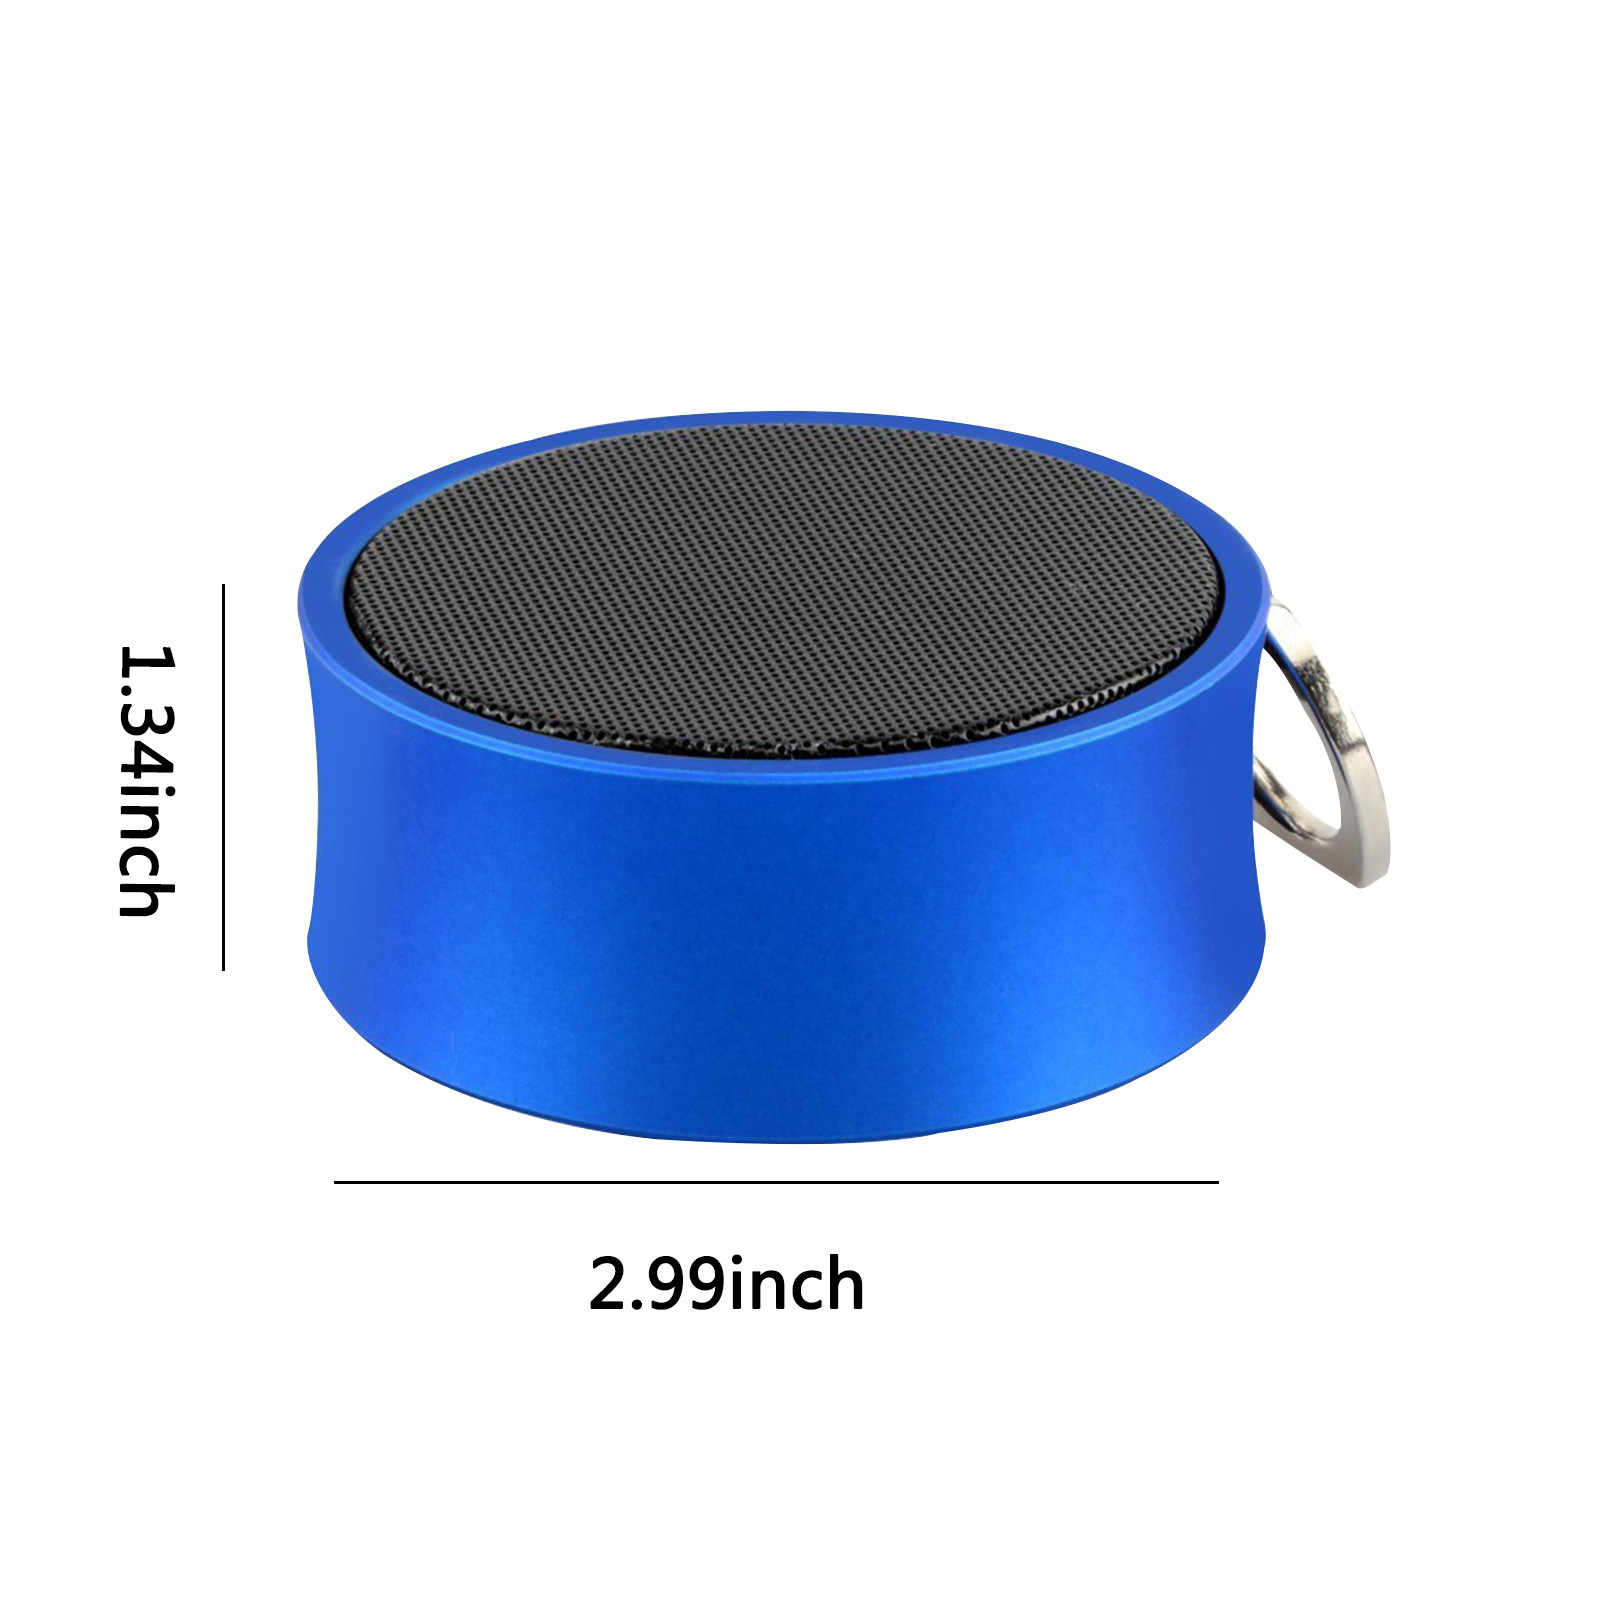 Ersazi Presents for 10 Year Old Girls 5.0 Chess Model Bluetooth Audio Outdoor Portable Mini Steel Subwoofer Plug-In Audio Desktop Audio on Clearance